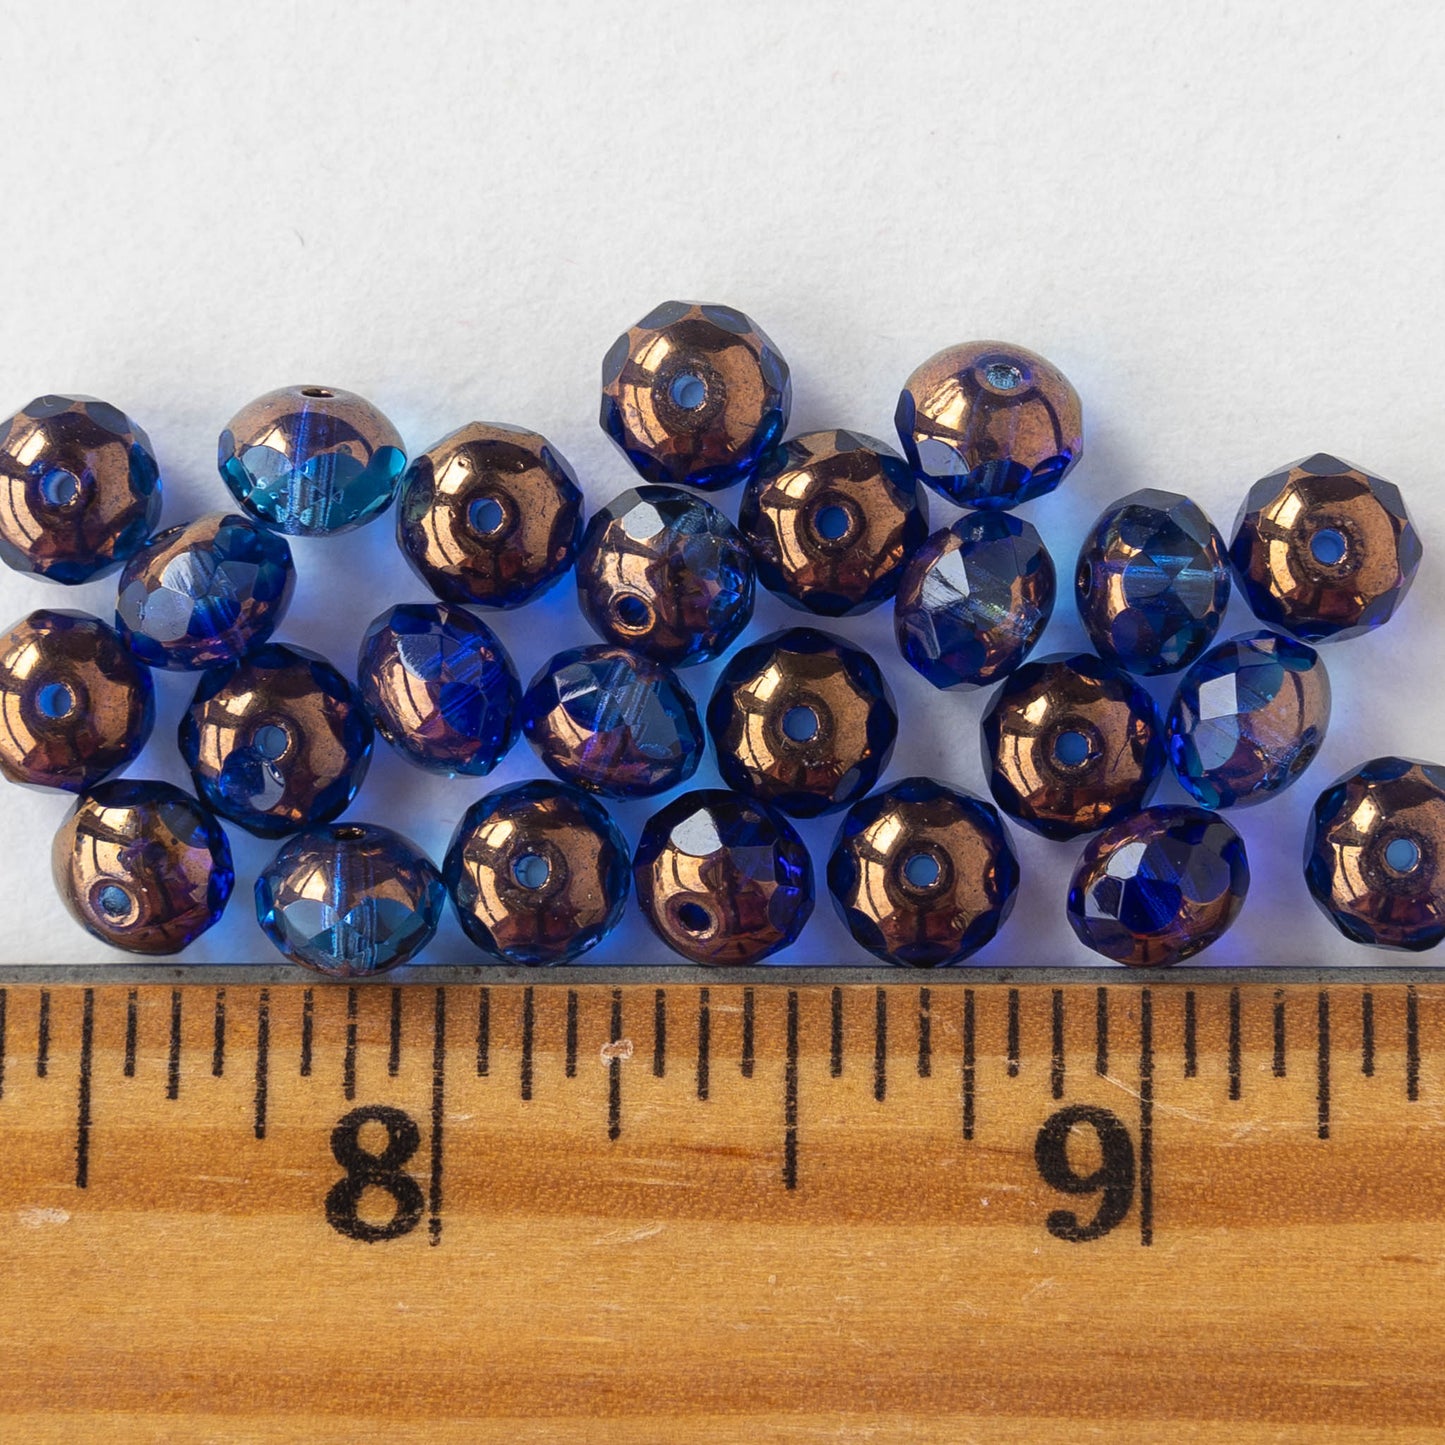 5x7mm Faceted Rondelle Beads - Sapphire and Sky Blue with a Bronze Finish - 25 beads